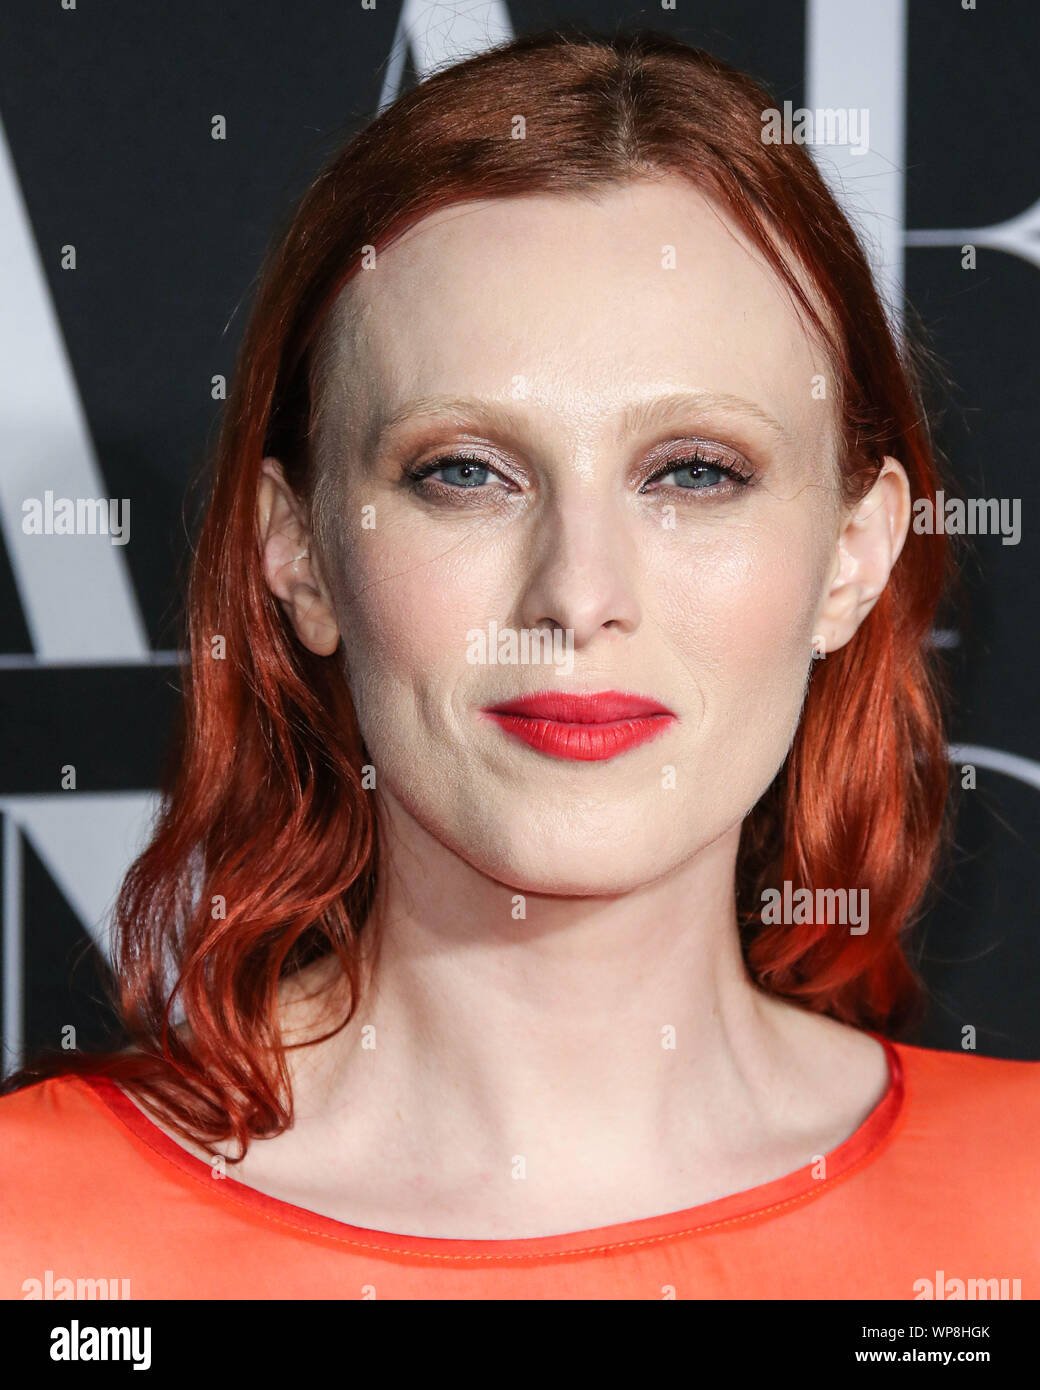 MANHATTAN, NEW YORK CITY, NEW YORK, USA - SEPTEMBER 06: Karen Elson arrives at the 2019 Harper's BAZAAR Celebration of 'ICONS By Carine Roitfeld' held at The Plaza Hotel on September 6, 2019 in Manhattan, New York City, New York, United States. (Photo by Xavier Collin/Image Press Agency) Stock Photo